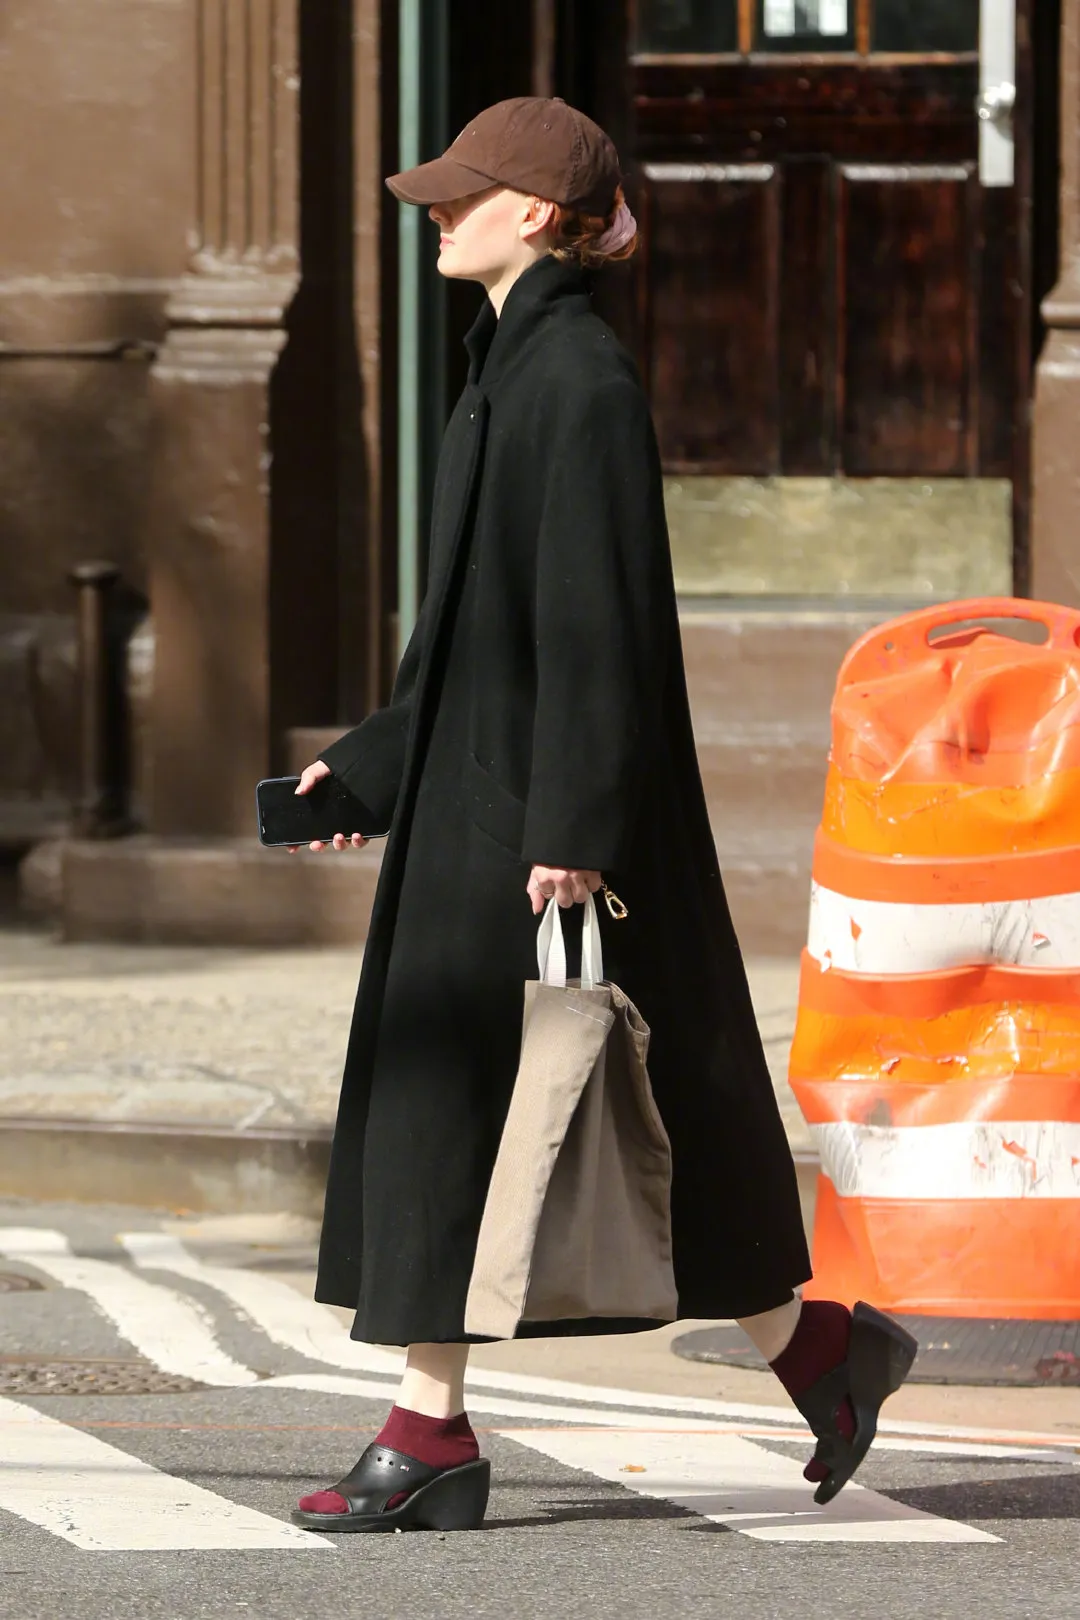 Photos of Emma Stone going out in New York recently | FMV6